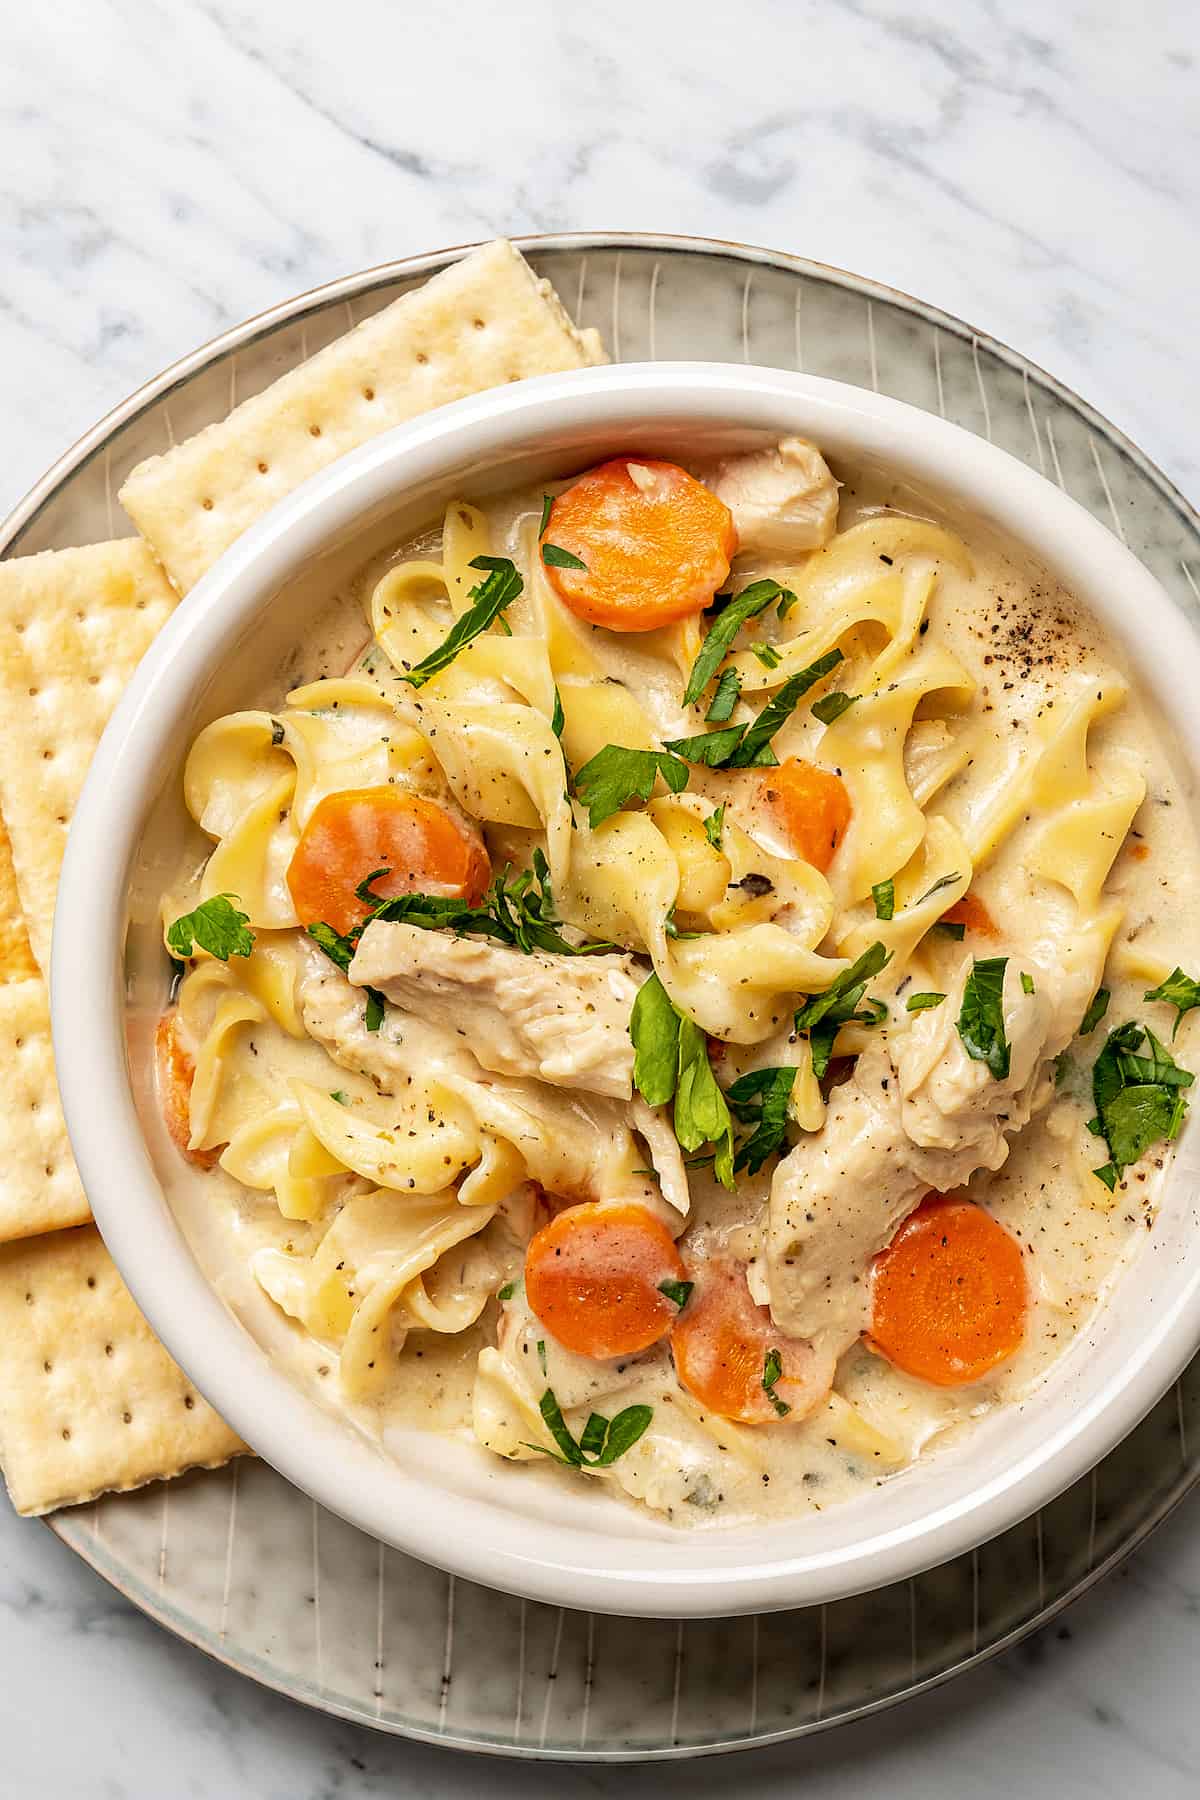 Creamy soup with chicken, egg noodles, and carrots in a bowl.